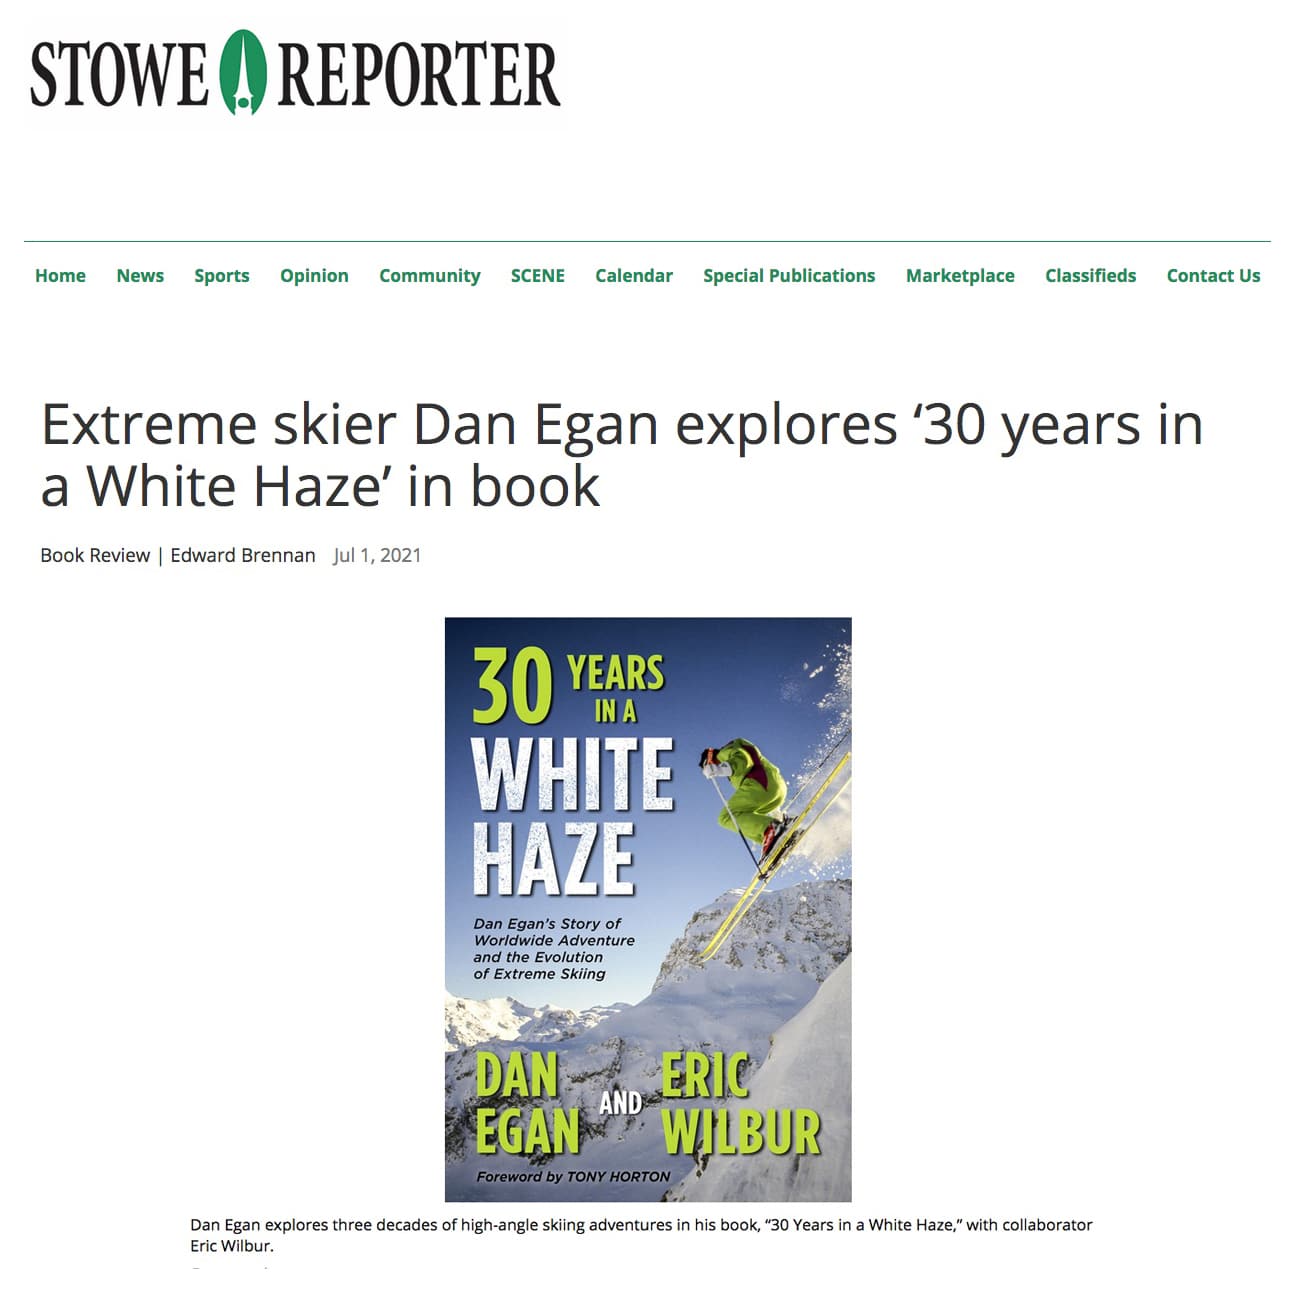 Extreme skier Dan Egan explores ‘30 years in a White Haze’ in book